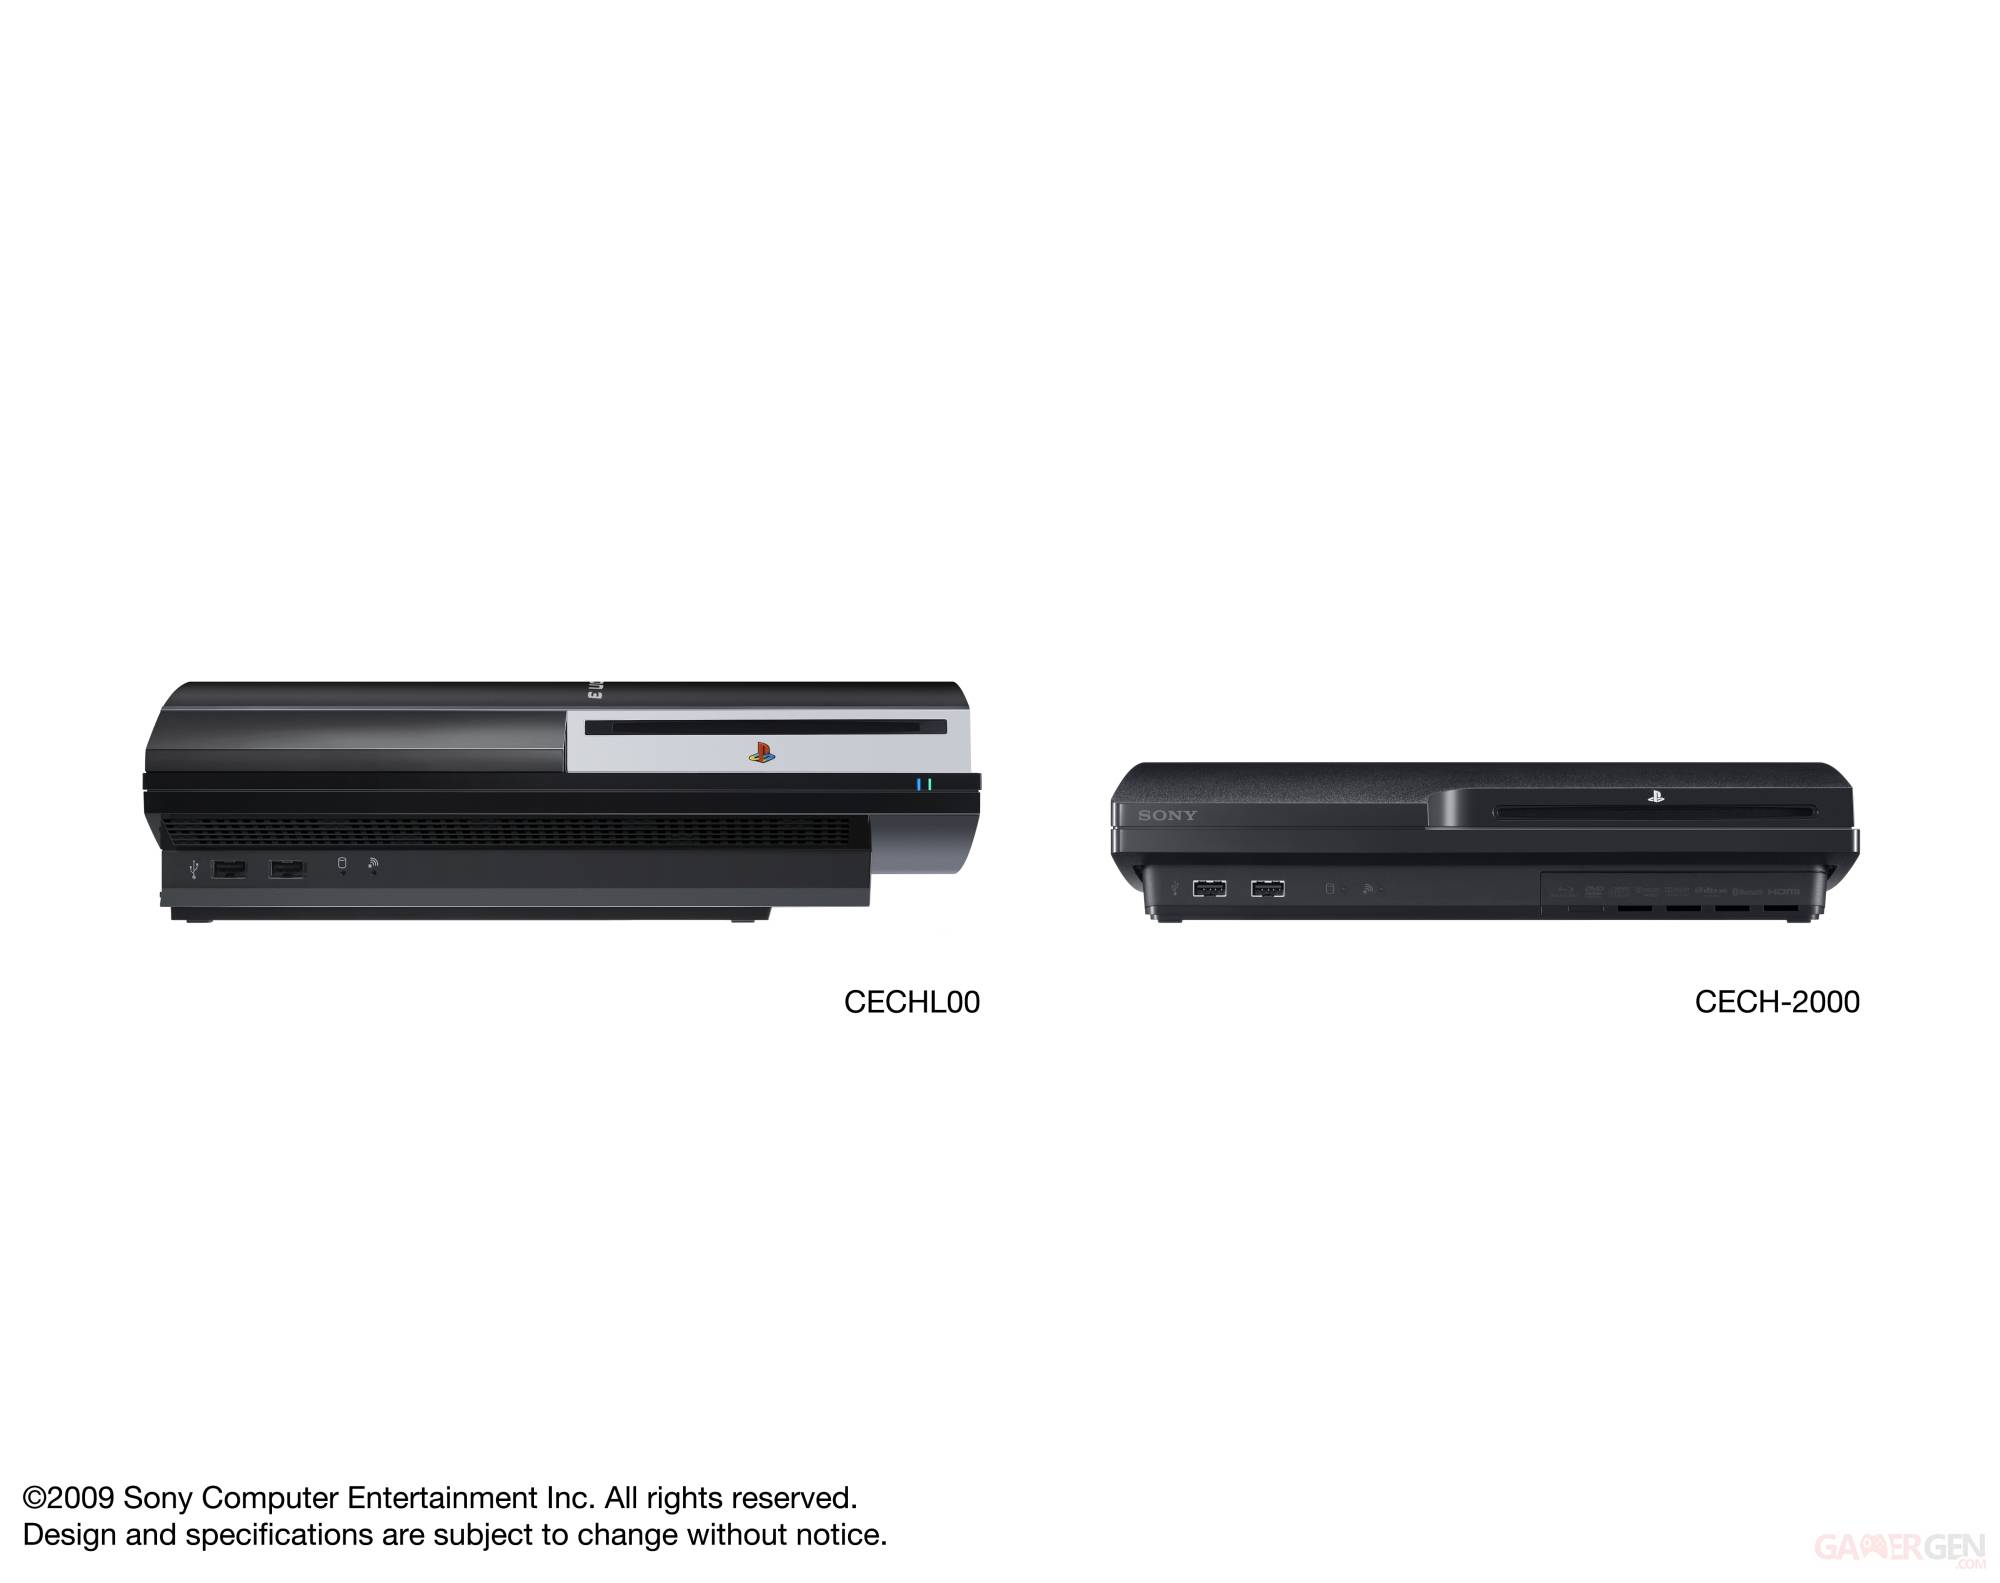 ps3slim_and_light_10